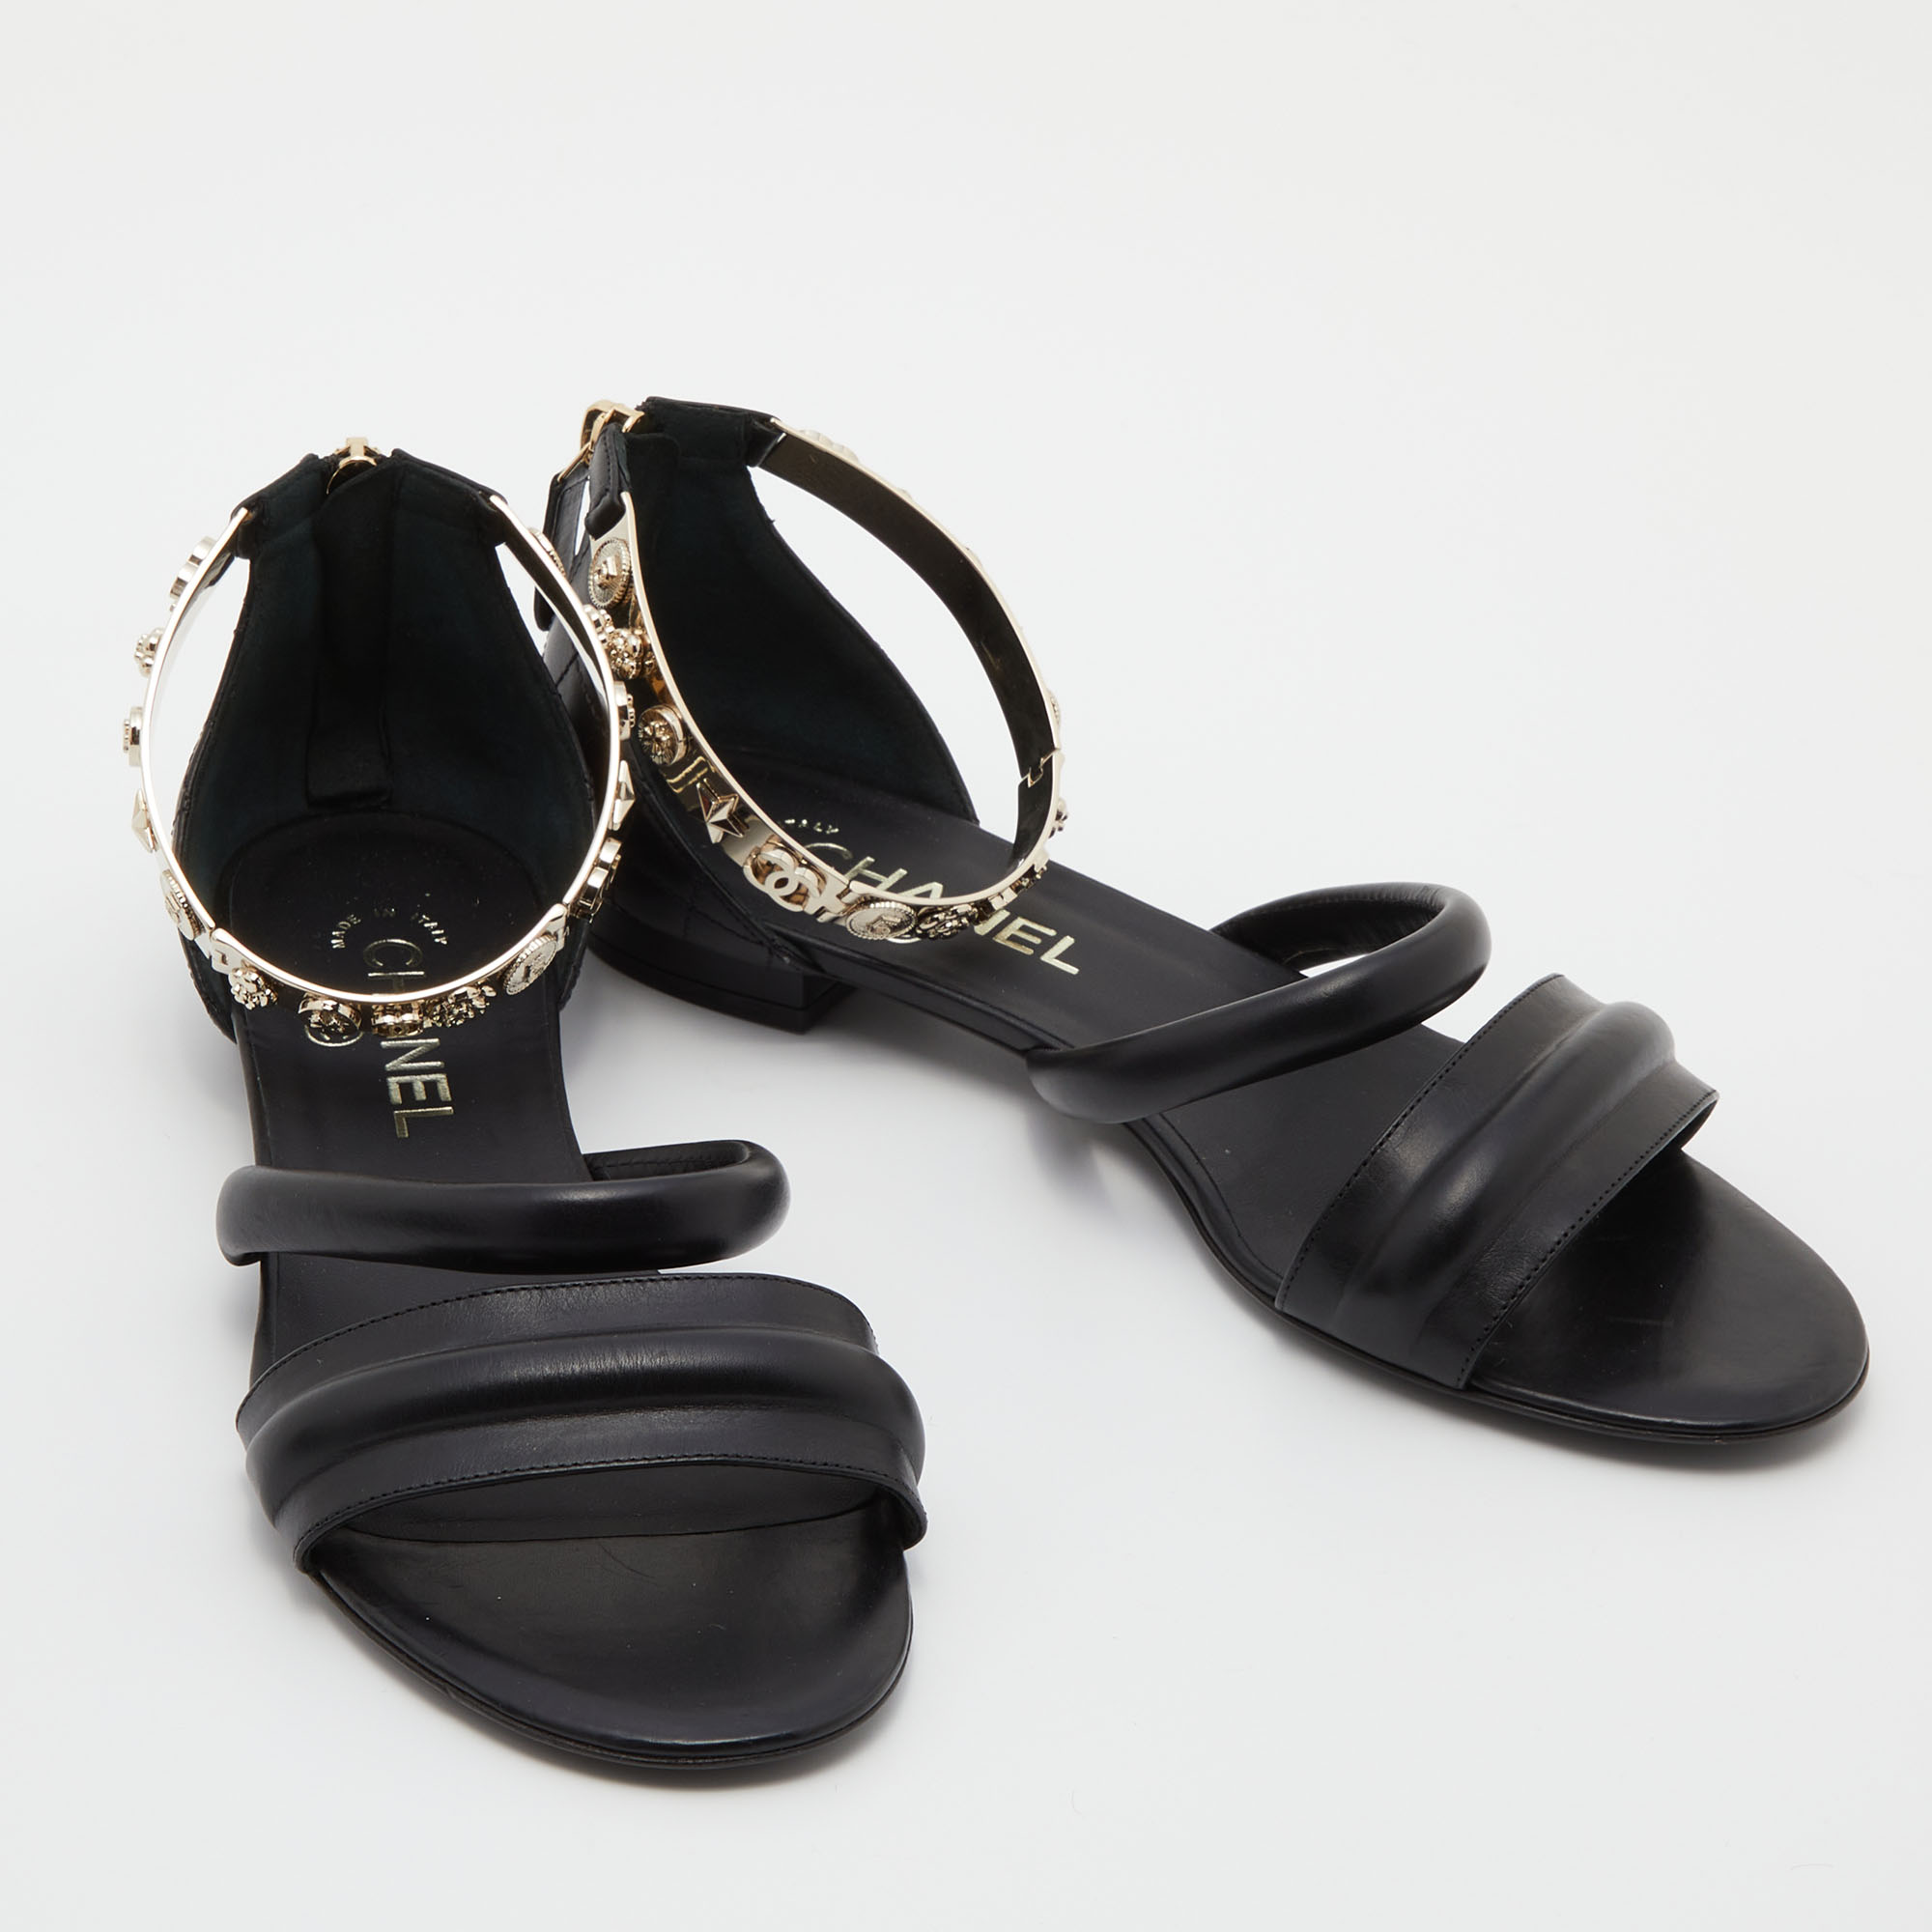 Chanel Black Quilted Leather Embellished Ankle Cuff Flat Sandals Size 38.5